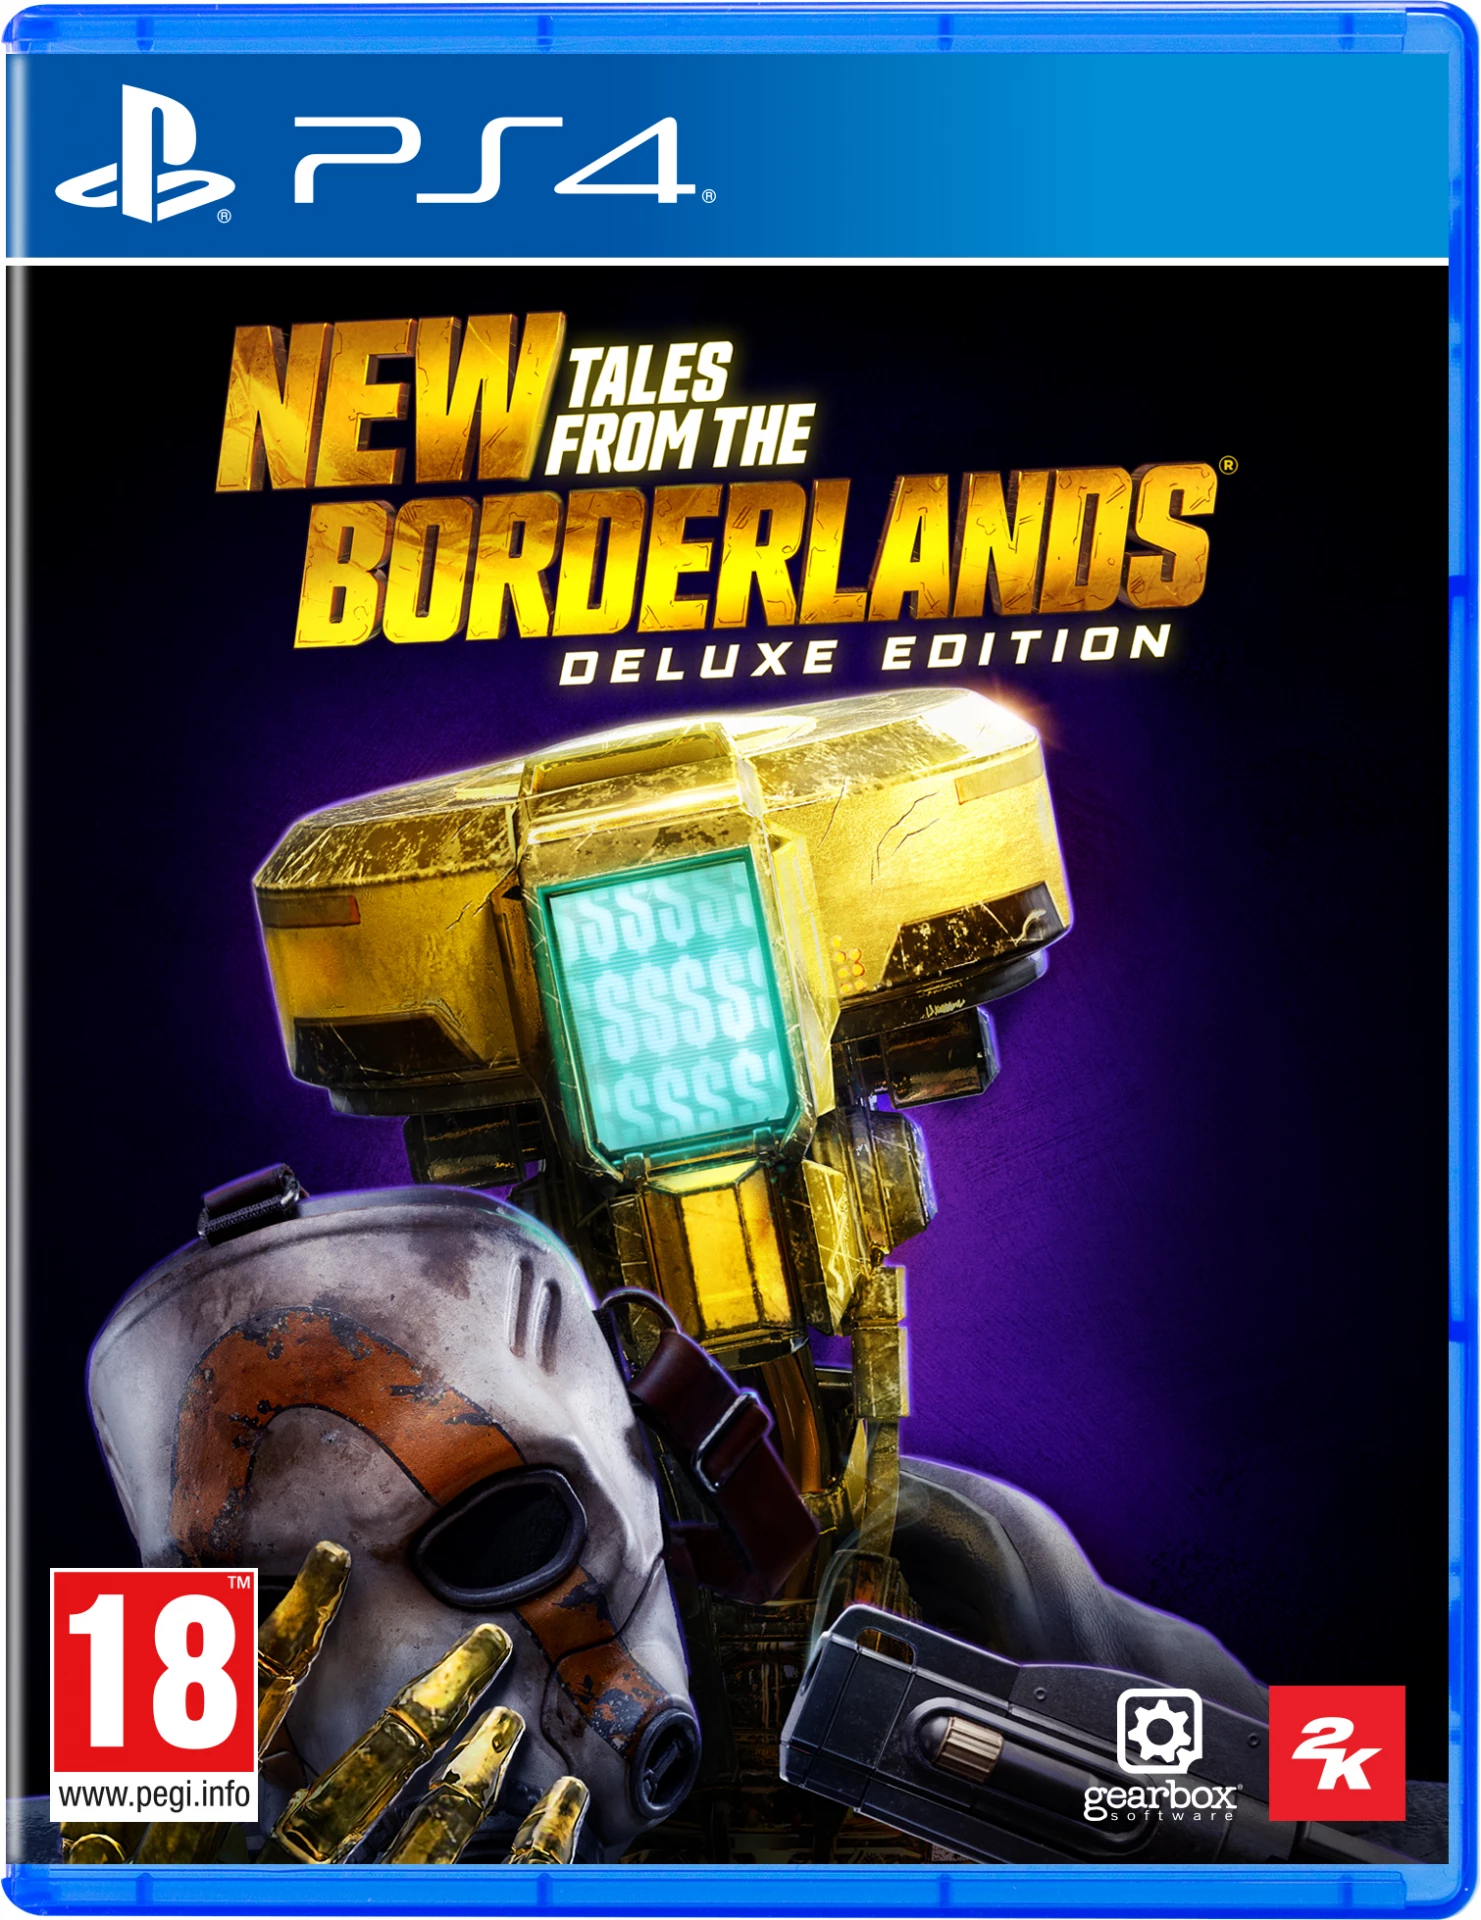 New Tales from the Borderlands - Deluxe Edition (PS4), Gearbox Entertainment